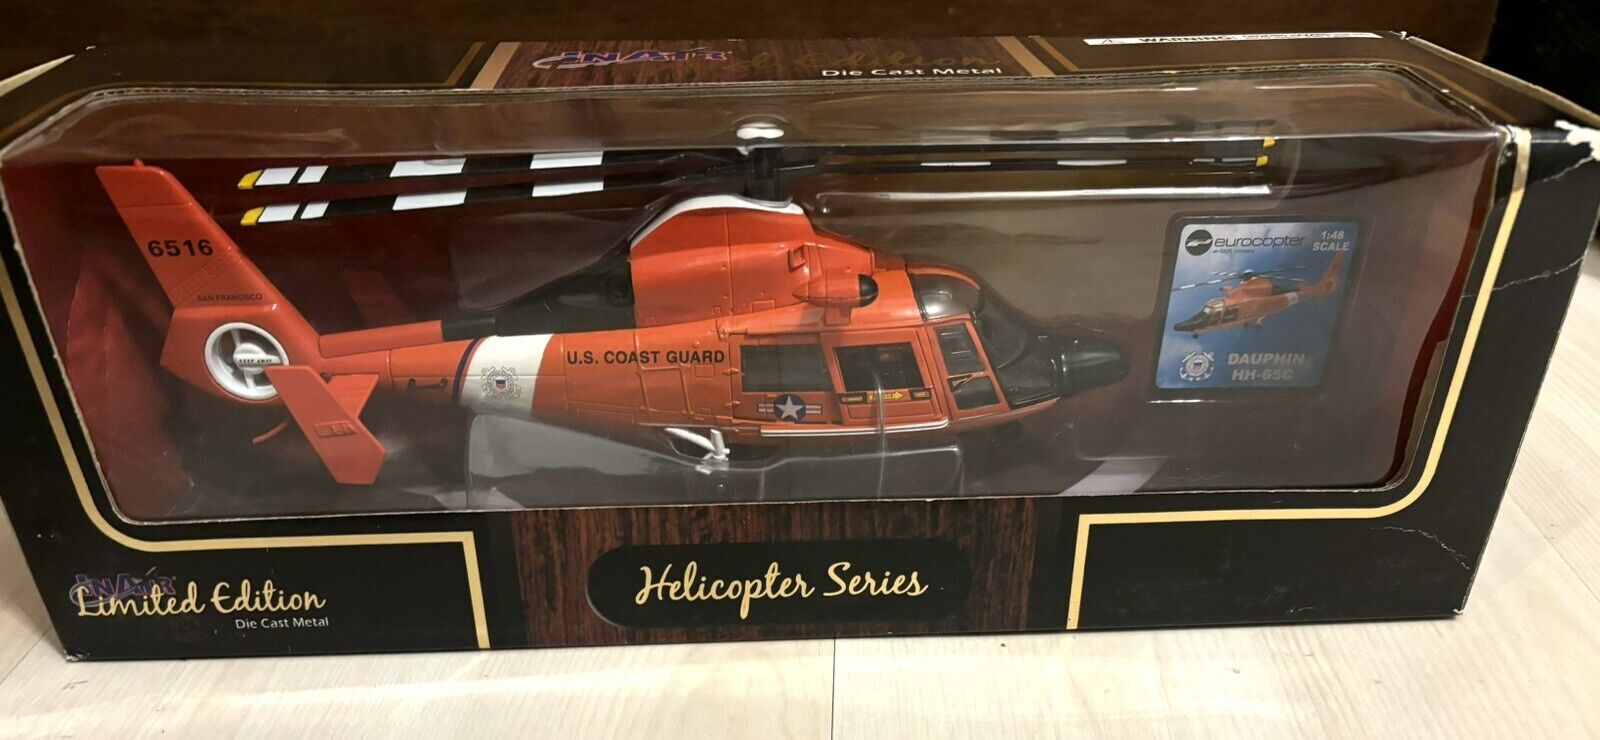 New- Limited Edition Collectible US Coast Guard Toy/model  Helicopter 1:48 Scale